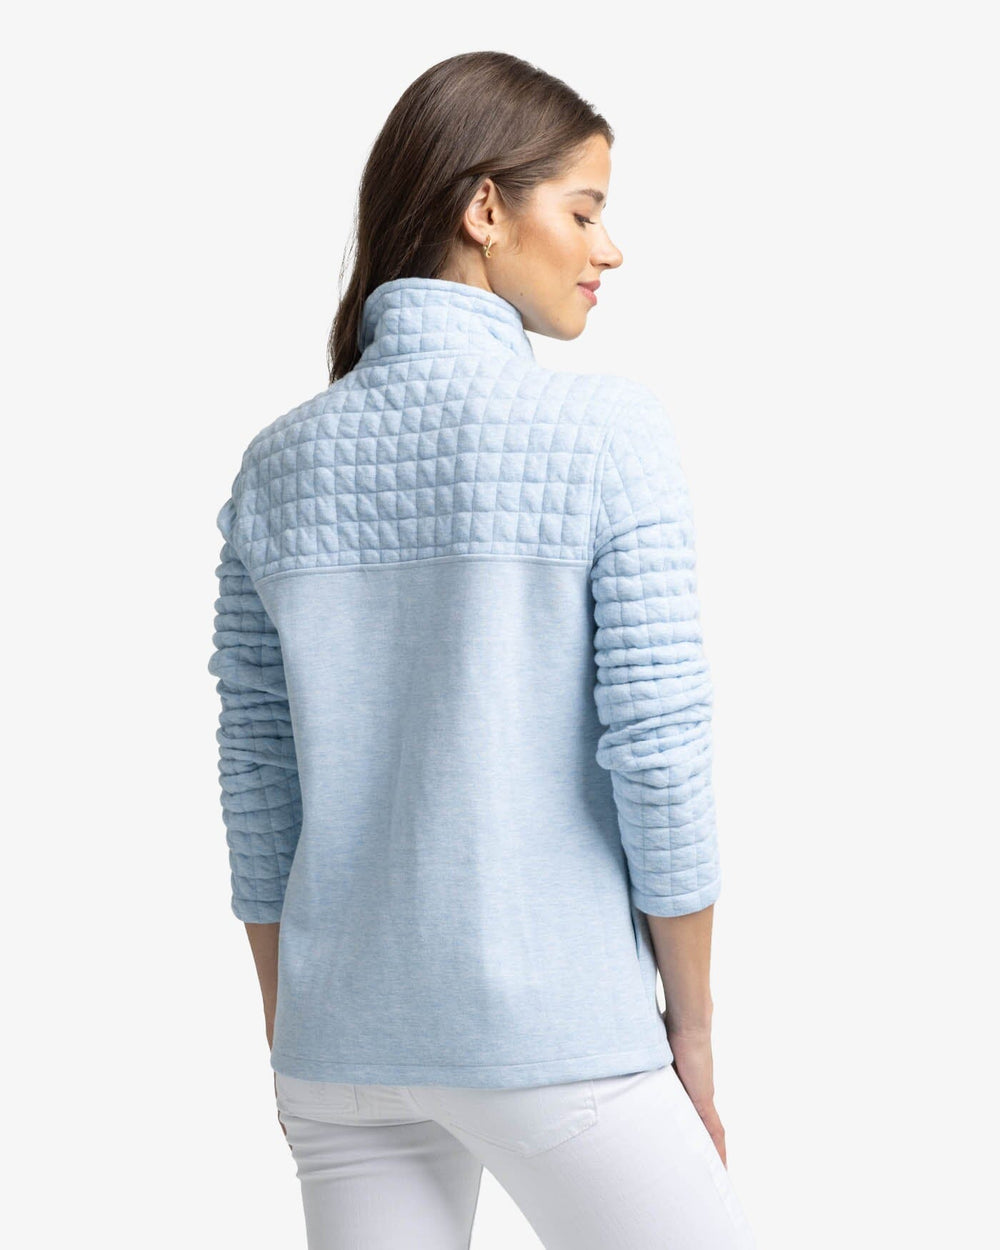 The back view of the Southern Tide Kelsea Quilted Heather Pullover by Southern Tide - Heather Dream Blue